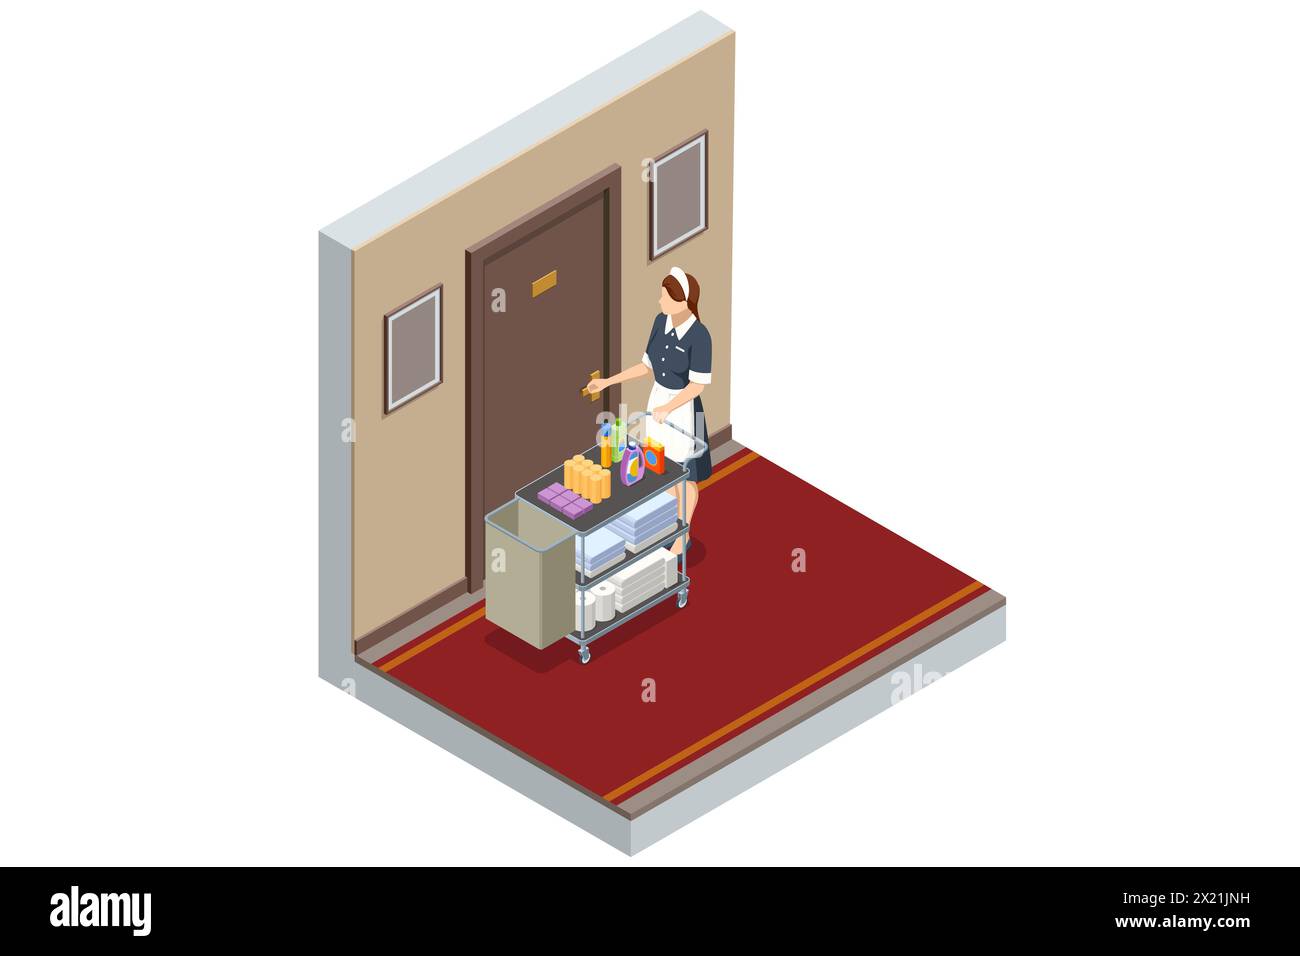 Isometric Housemaid opening the door to the room for cleaning. Woman chambermaid holding a towel standing with maid cart full of cleaning stuff in the Stock Vector